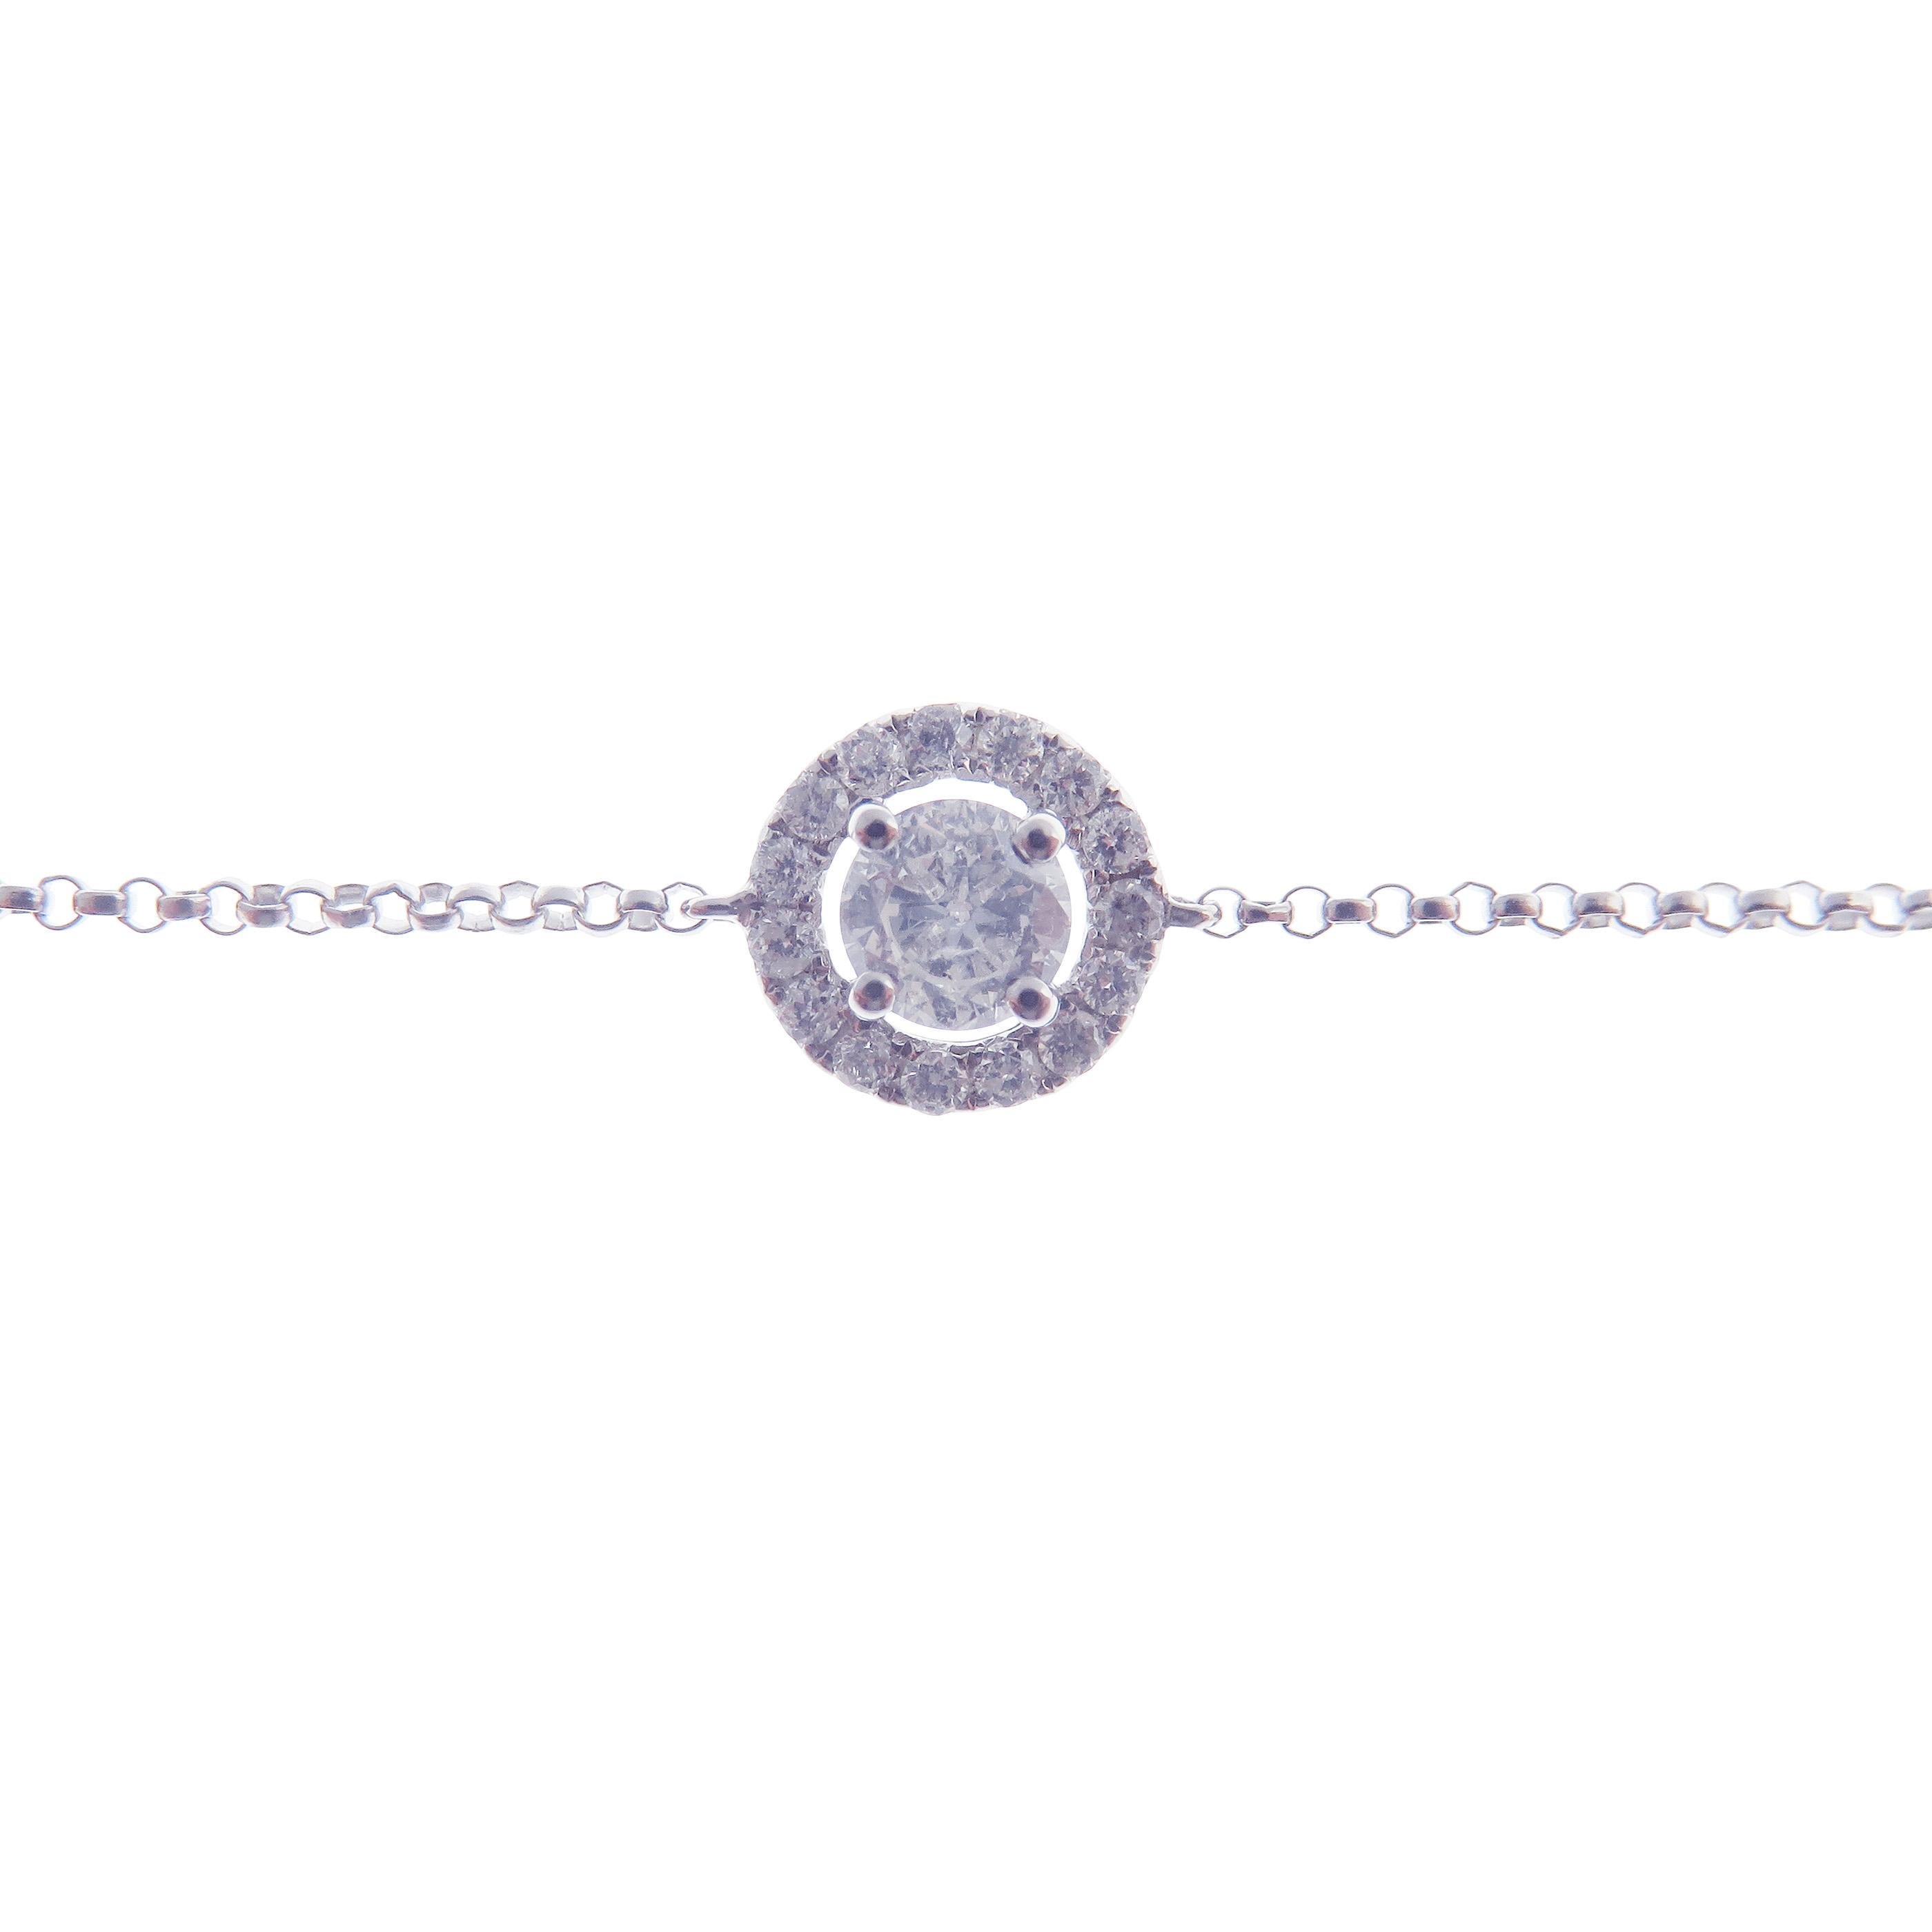 This delicate, diamond bracelet is crafted in 18-karat white gold, weighing approximately 0.34 total carats of SI Quality white diamonds. 
Bracelet clasp is lobster clasp with adjustable size.

Bracelet is approximately 7